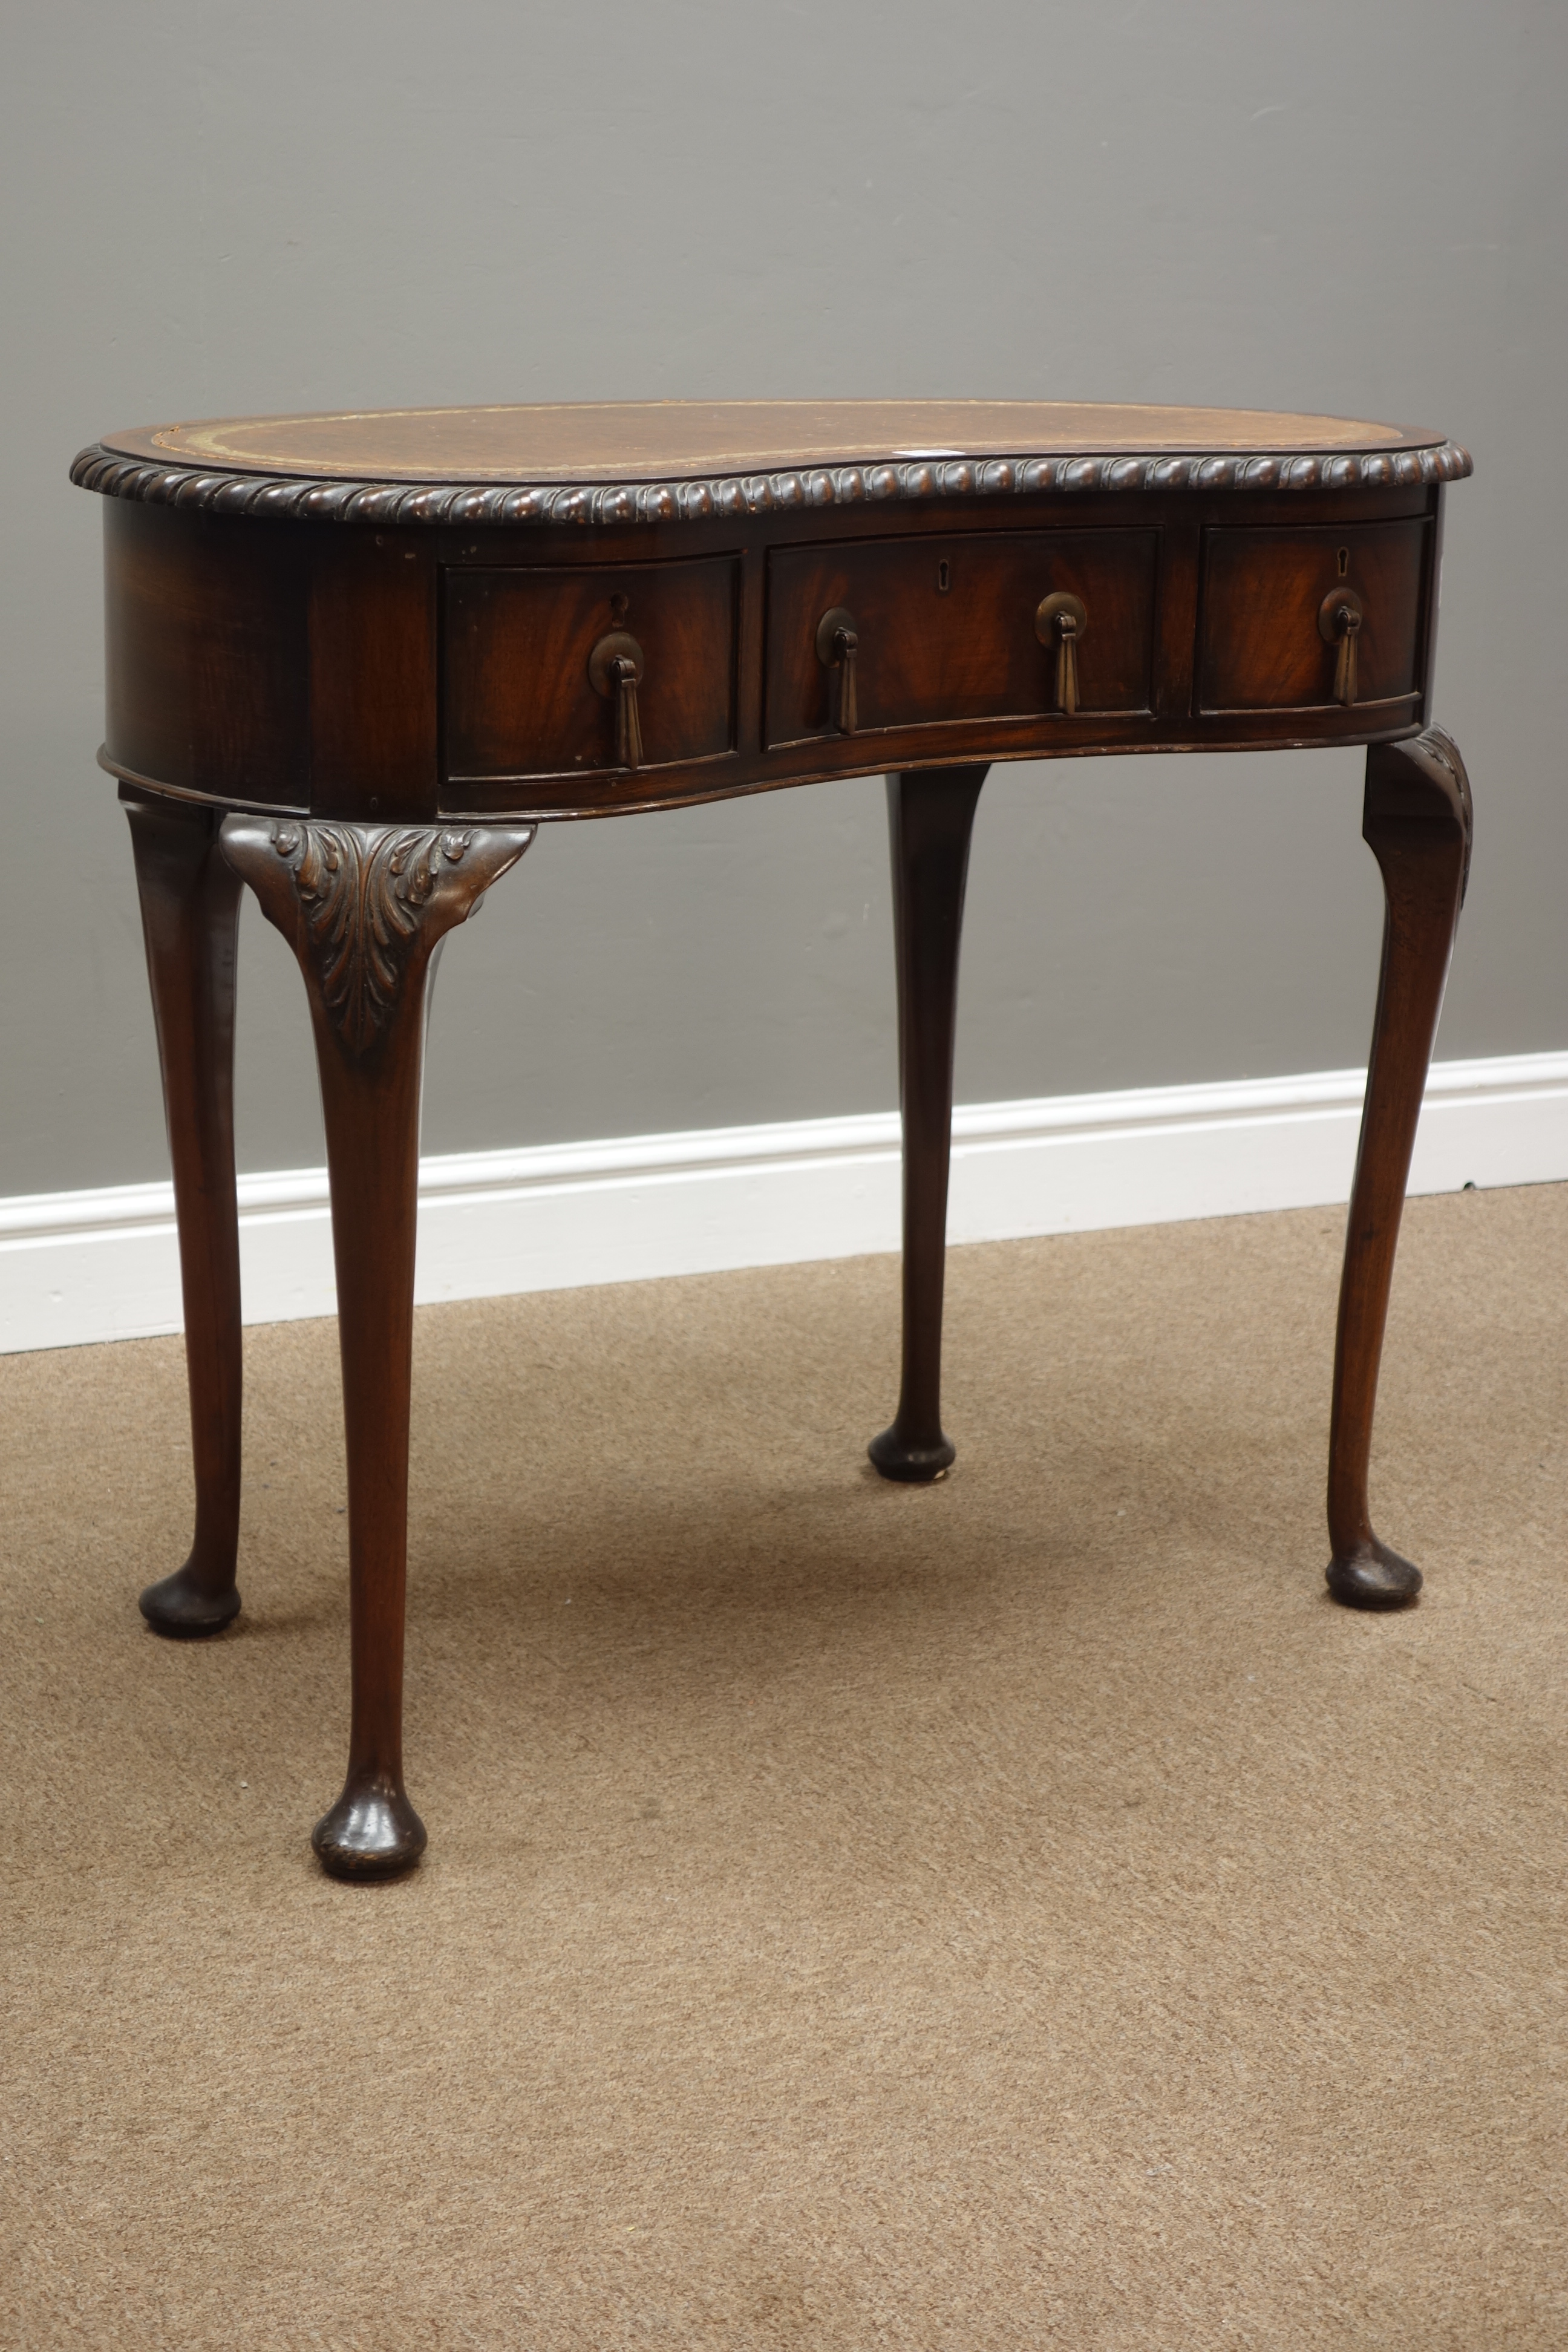 Early 20th century mahogany writing desk, kidney shaped top with gadroon moulding, - Image 2 of 5